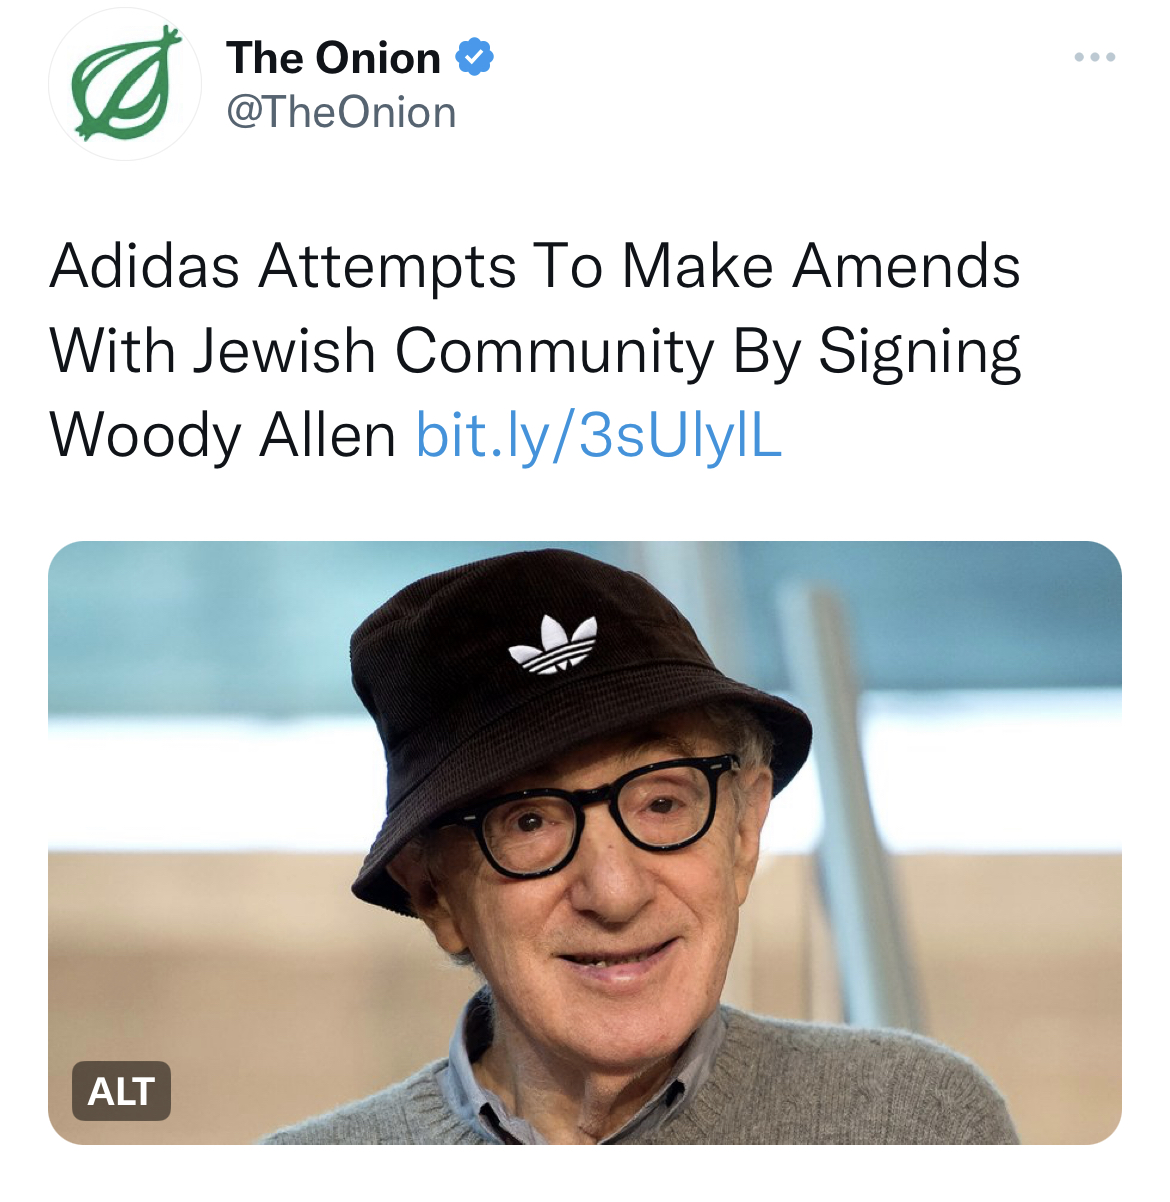 Tweets Roasting Celebs - The Onion Adidas Attempts To Make Amends With Jewish Community By Signing Woody Allen bit.ly3sUlylL Alt